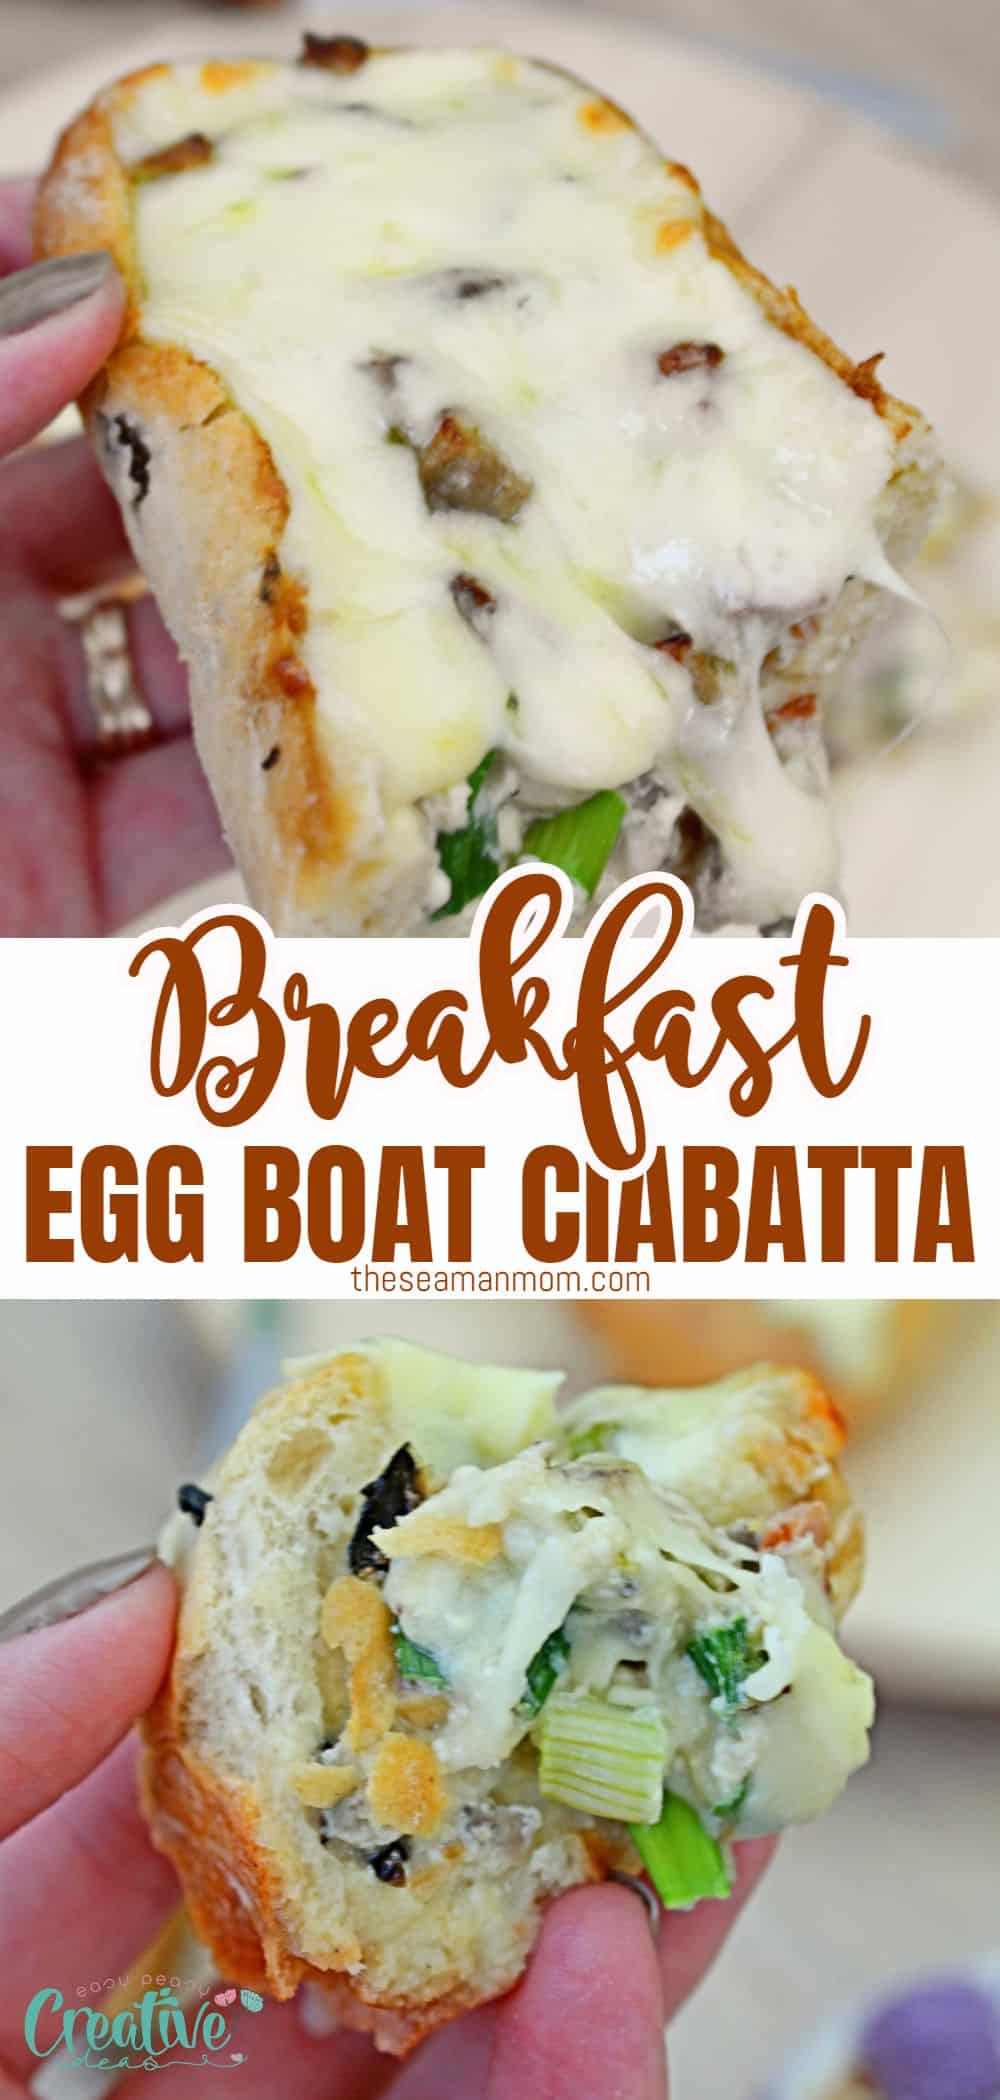 Breakfast ciabatta bread is perfect for nesting fluffy oven baked omelette, full of tasty ham, cheese, mushrooms and scallion! This egg boat is a super easy and quick way to serve breakfast on the go!

 via @petroneagu